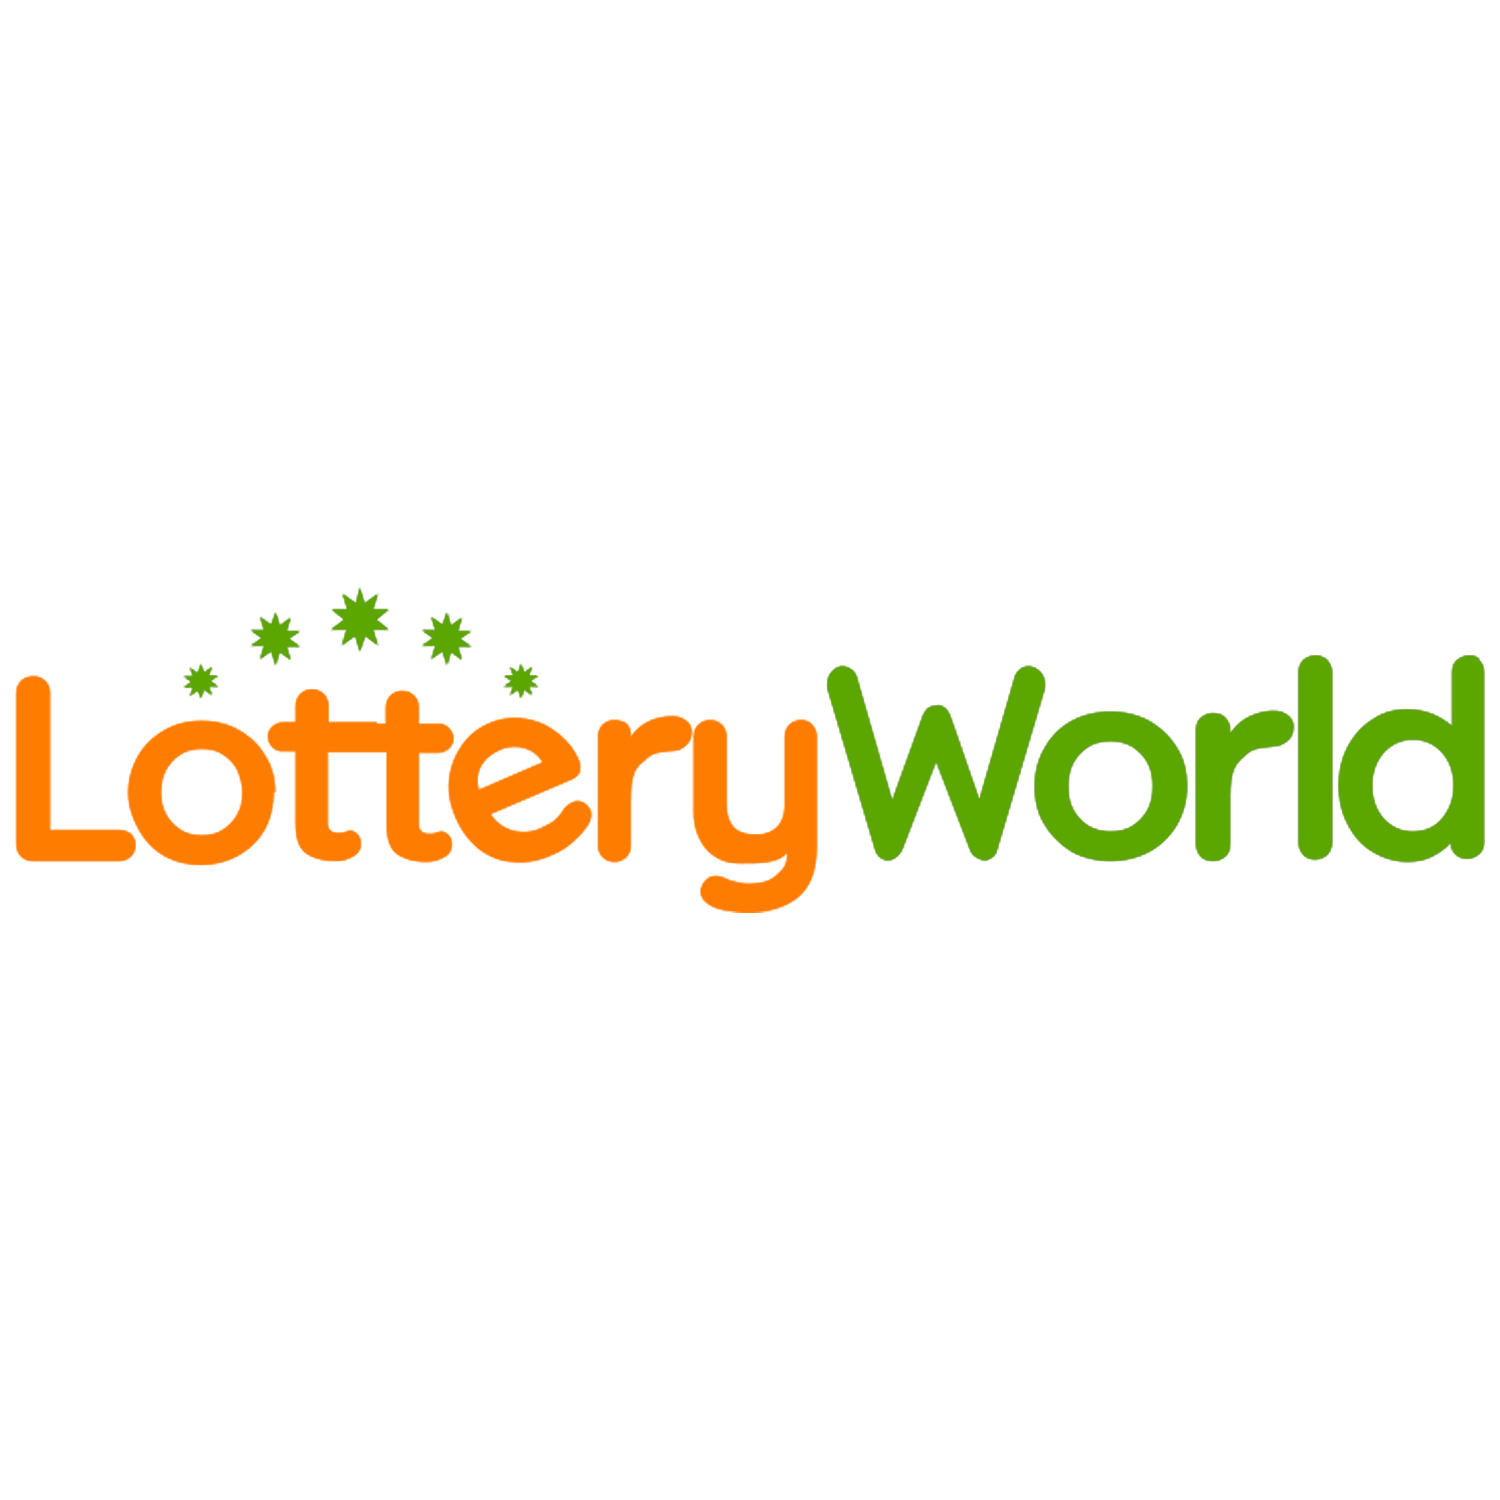 Learn how to buy lottery tickets and play games on Lottery World India.